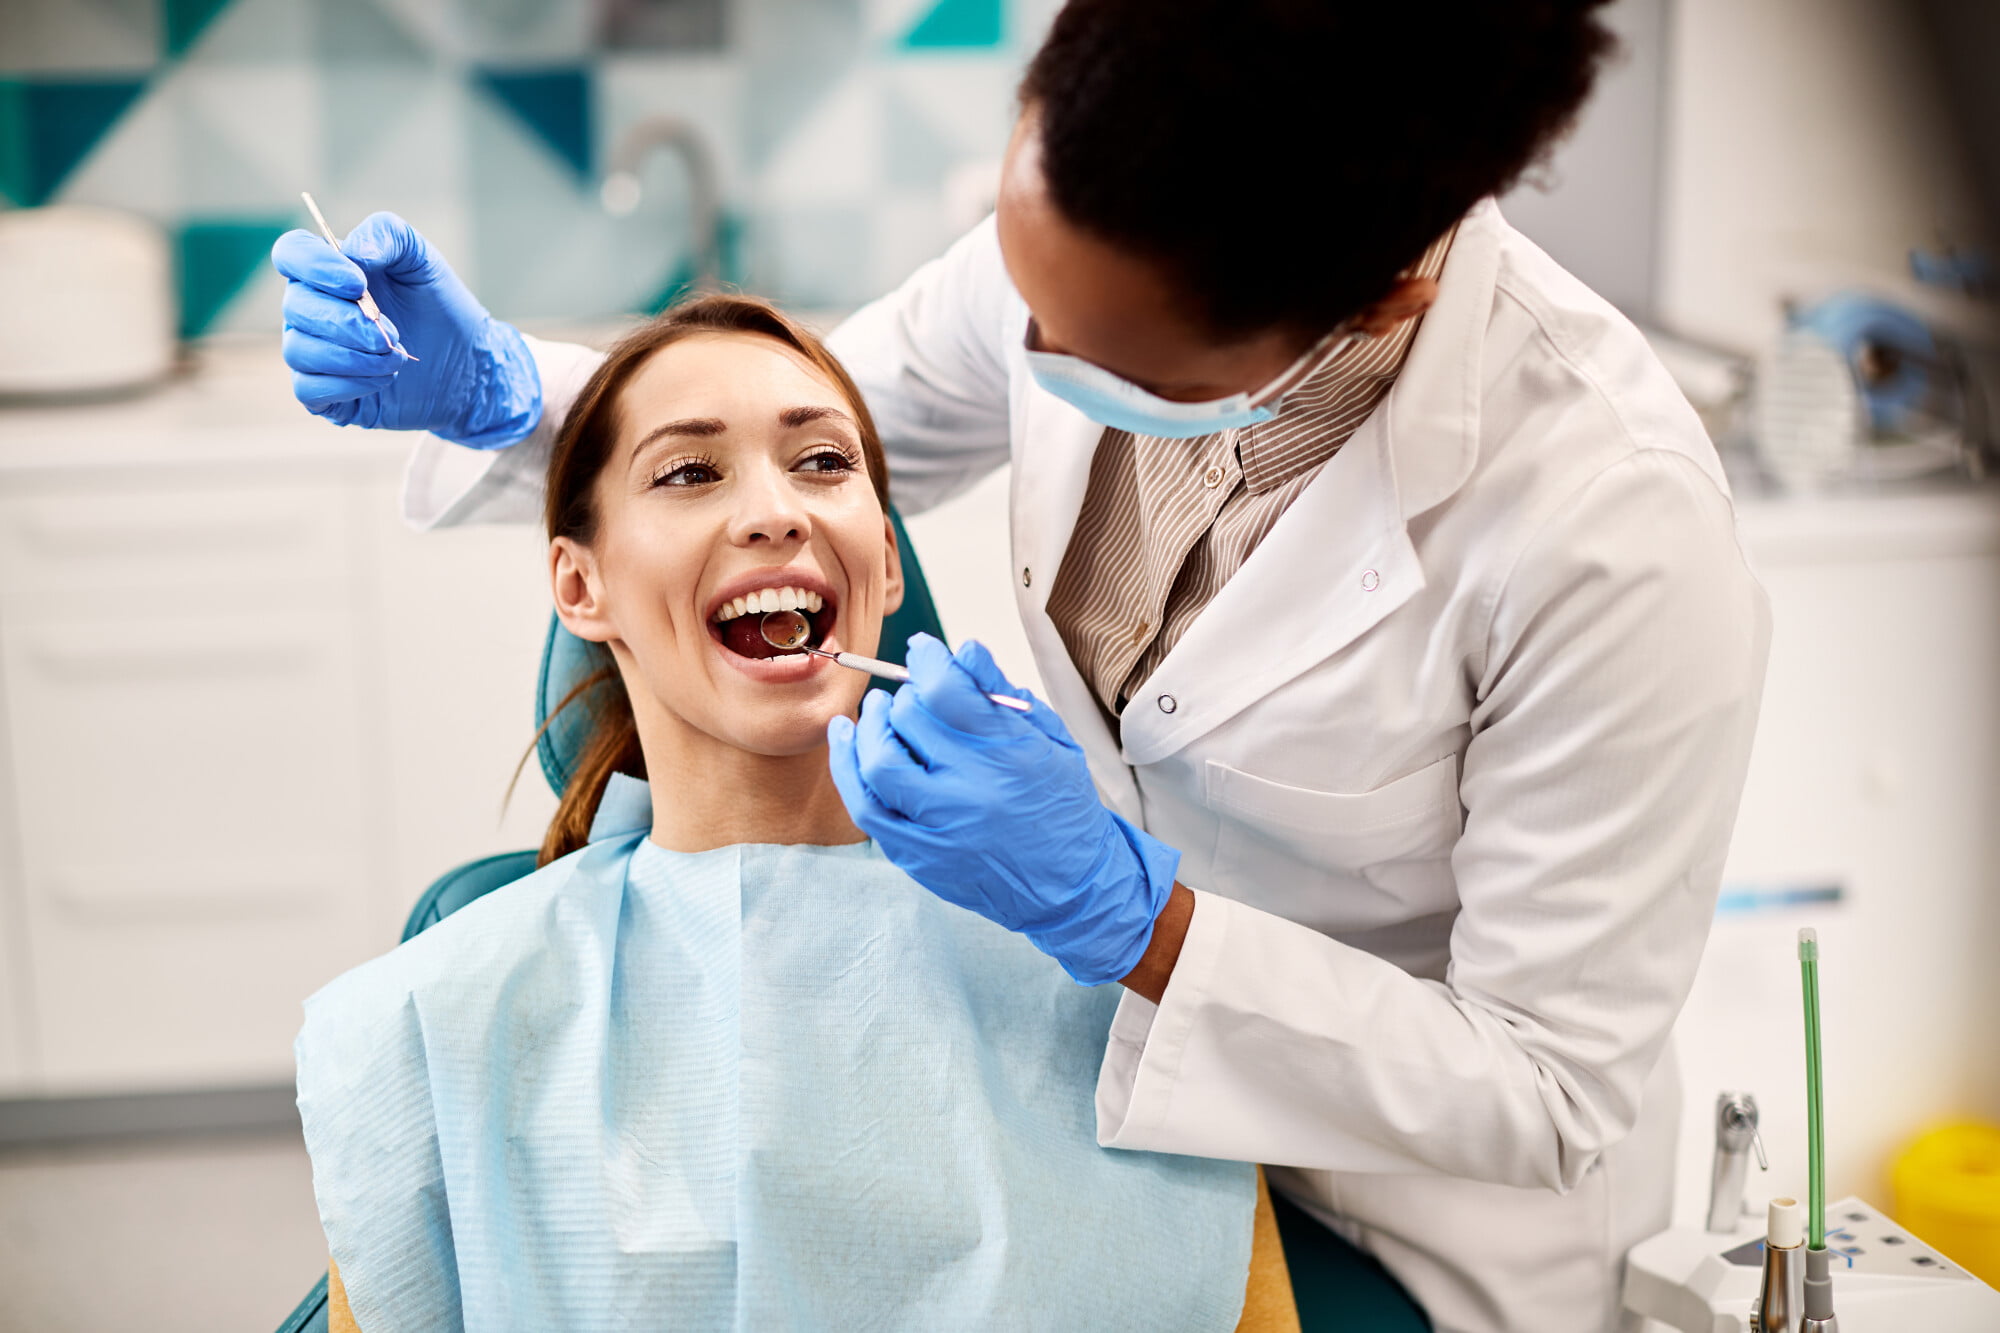 Hygienist vs dentist: How much do you know about the differences between the two? Read on to learn more about the differences between them.